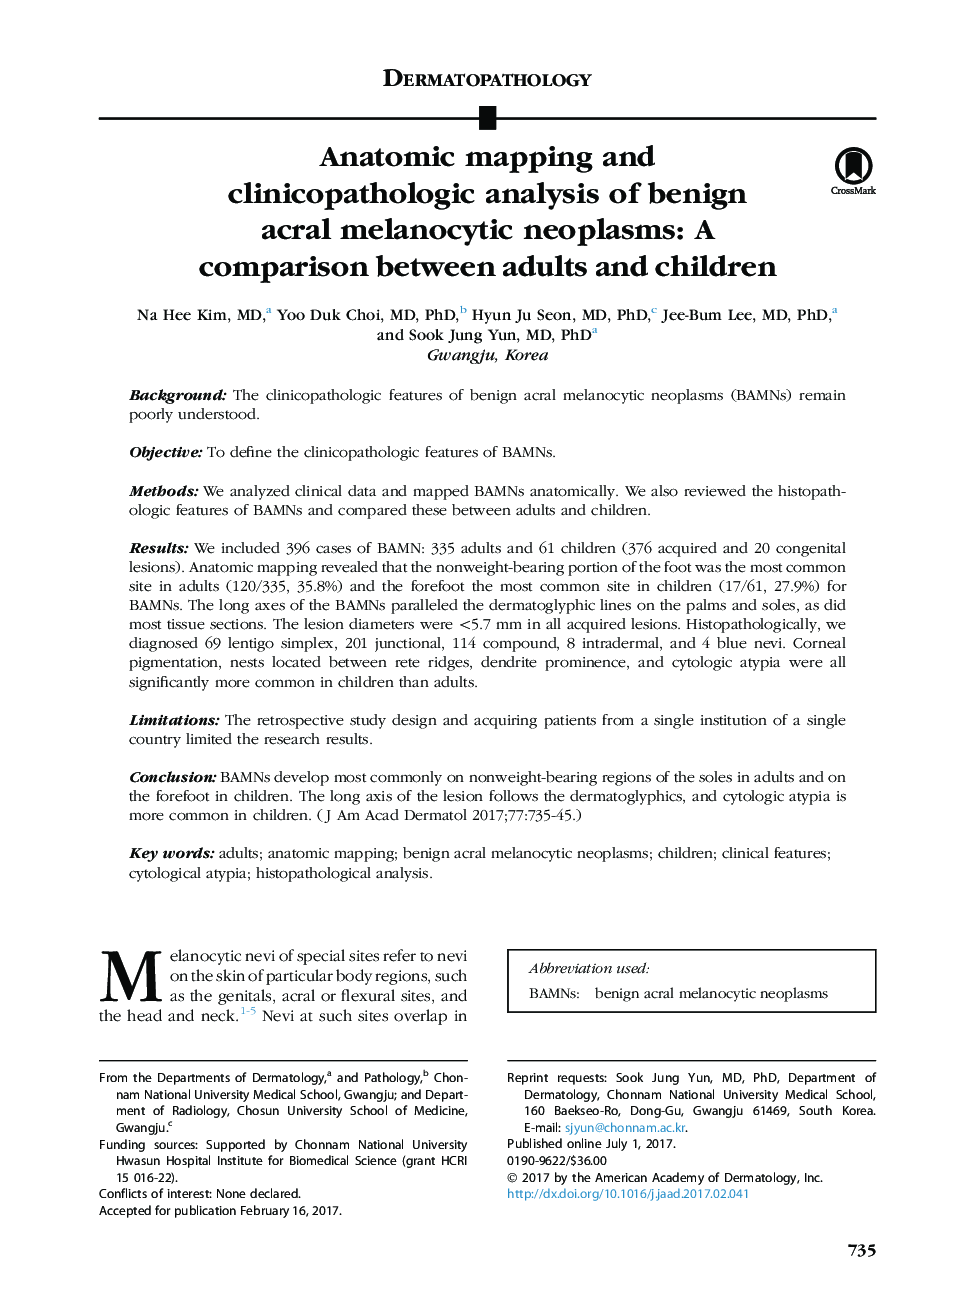 Anatomic mapping and clinicopathologic analysis of benign acral melanocytic neoplasms: A comparison between adults and children